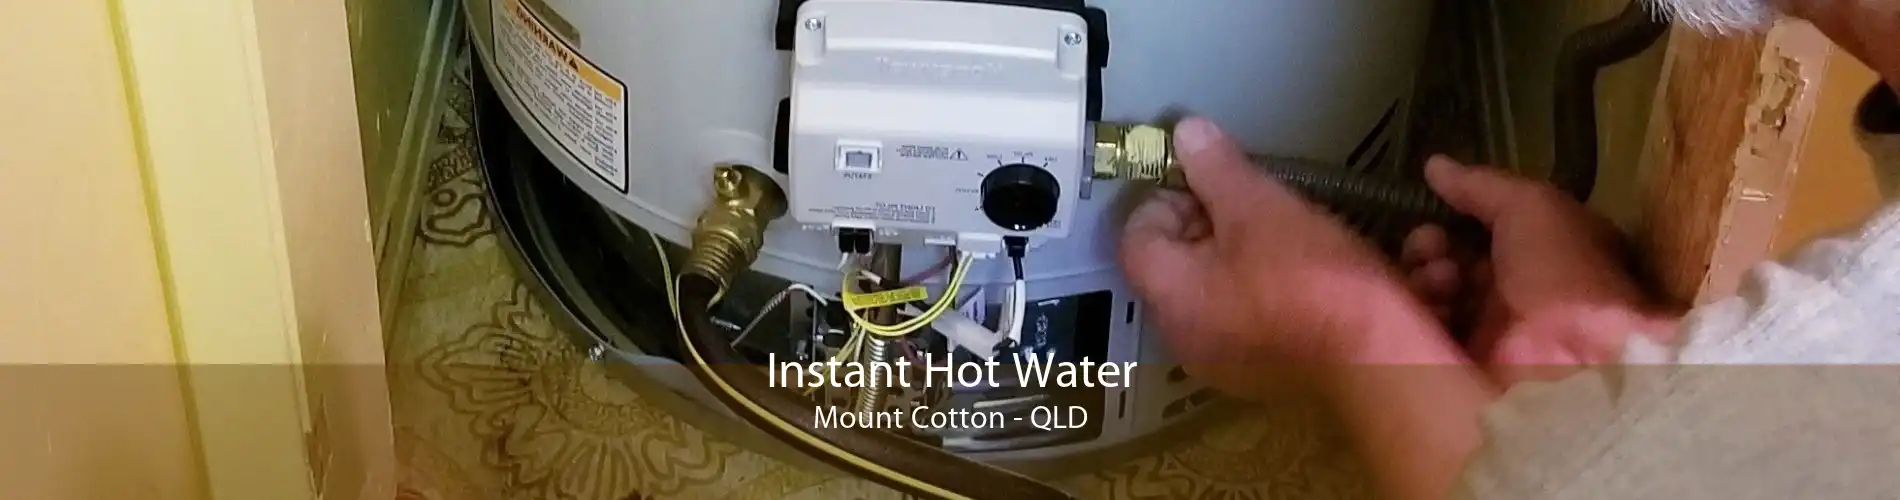 Instant Hot Water Mount Cotton - QLD